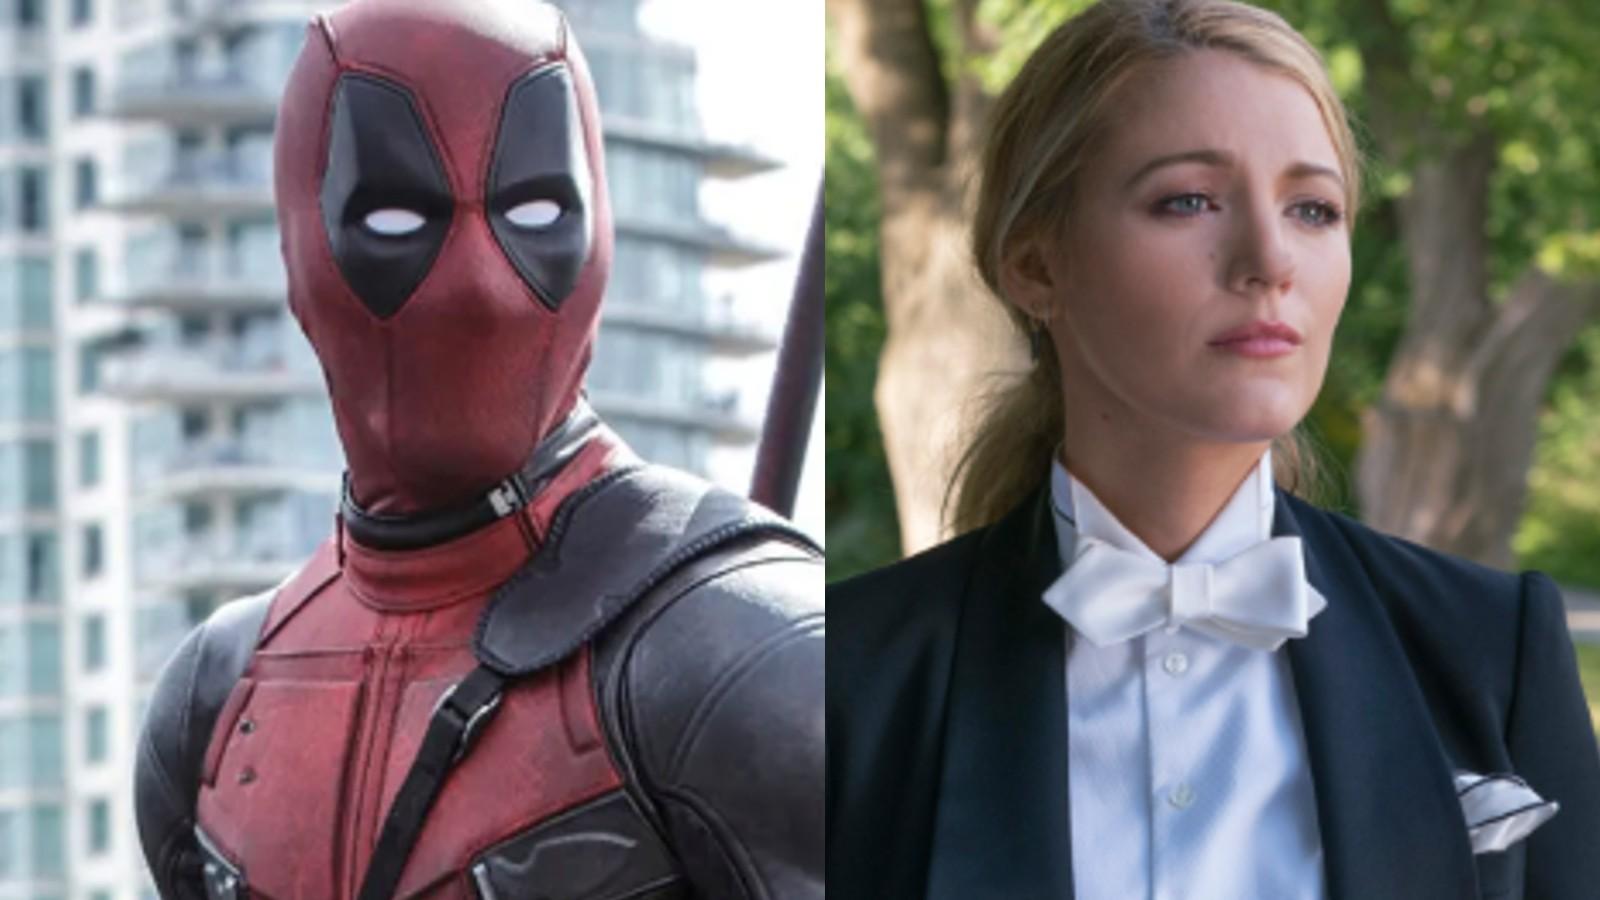 Deadpool and Blake Lively in A Simple Favor